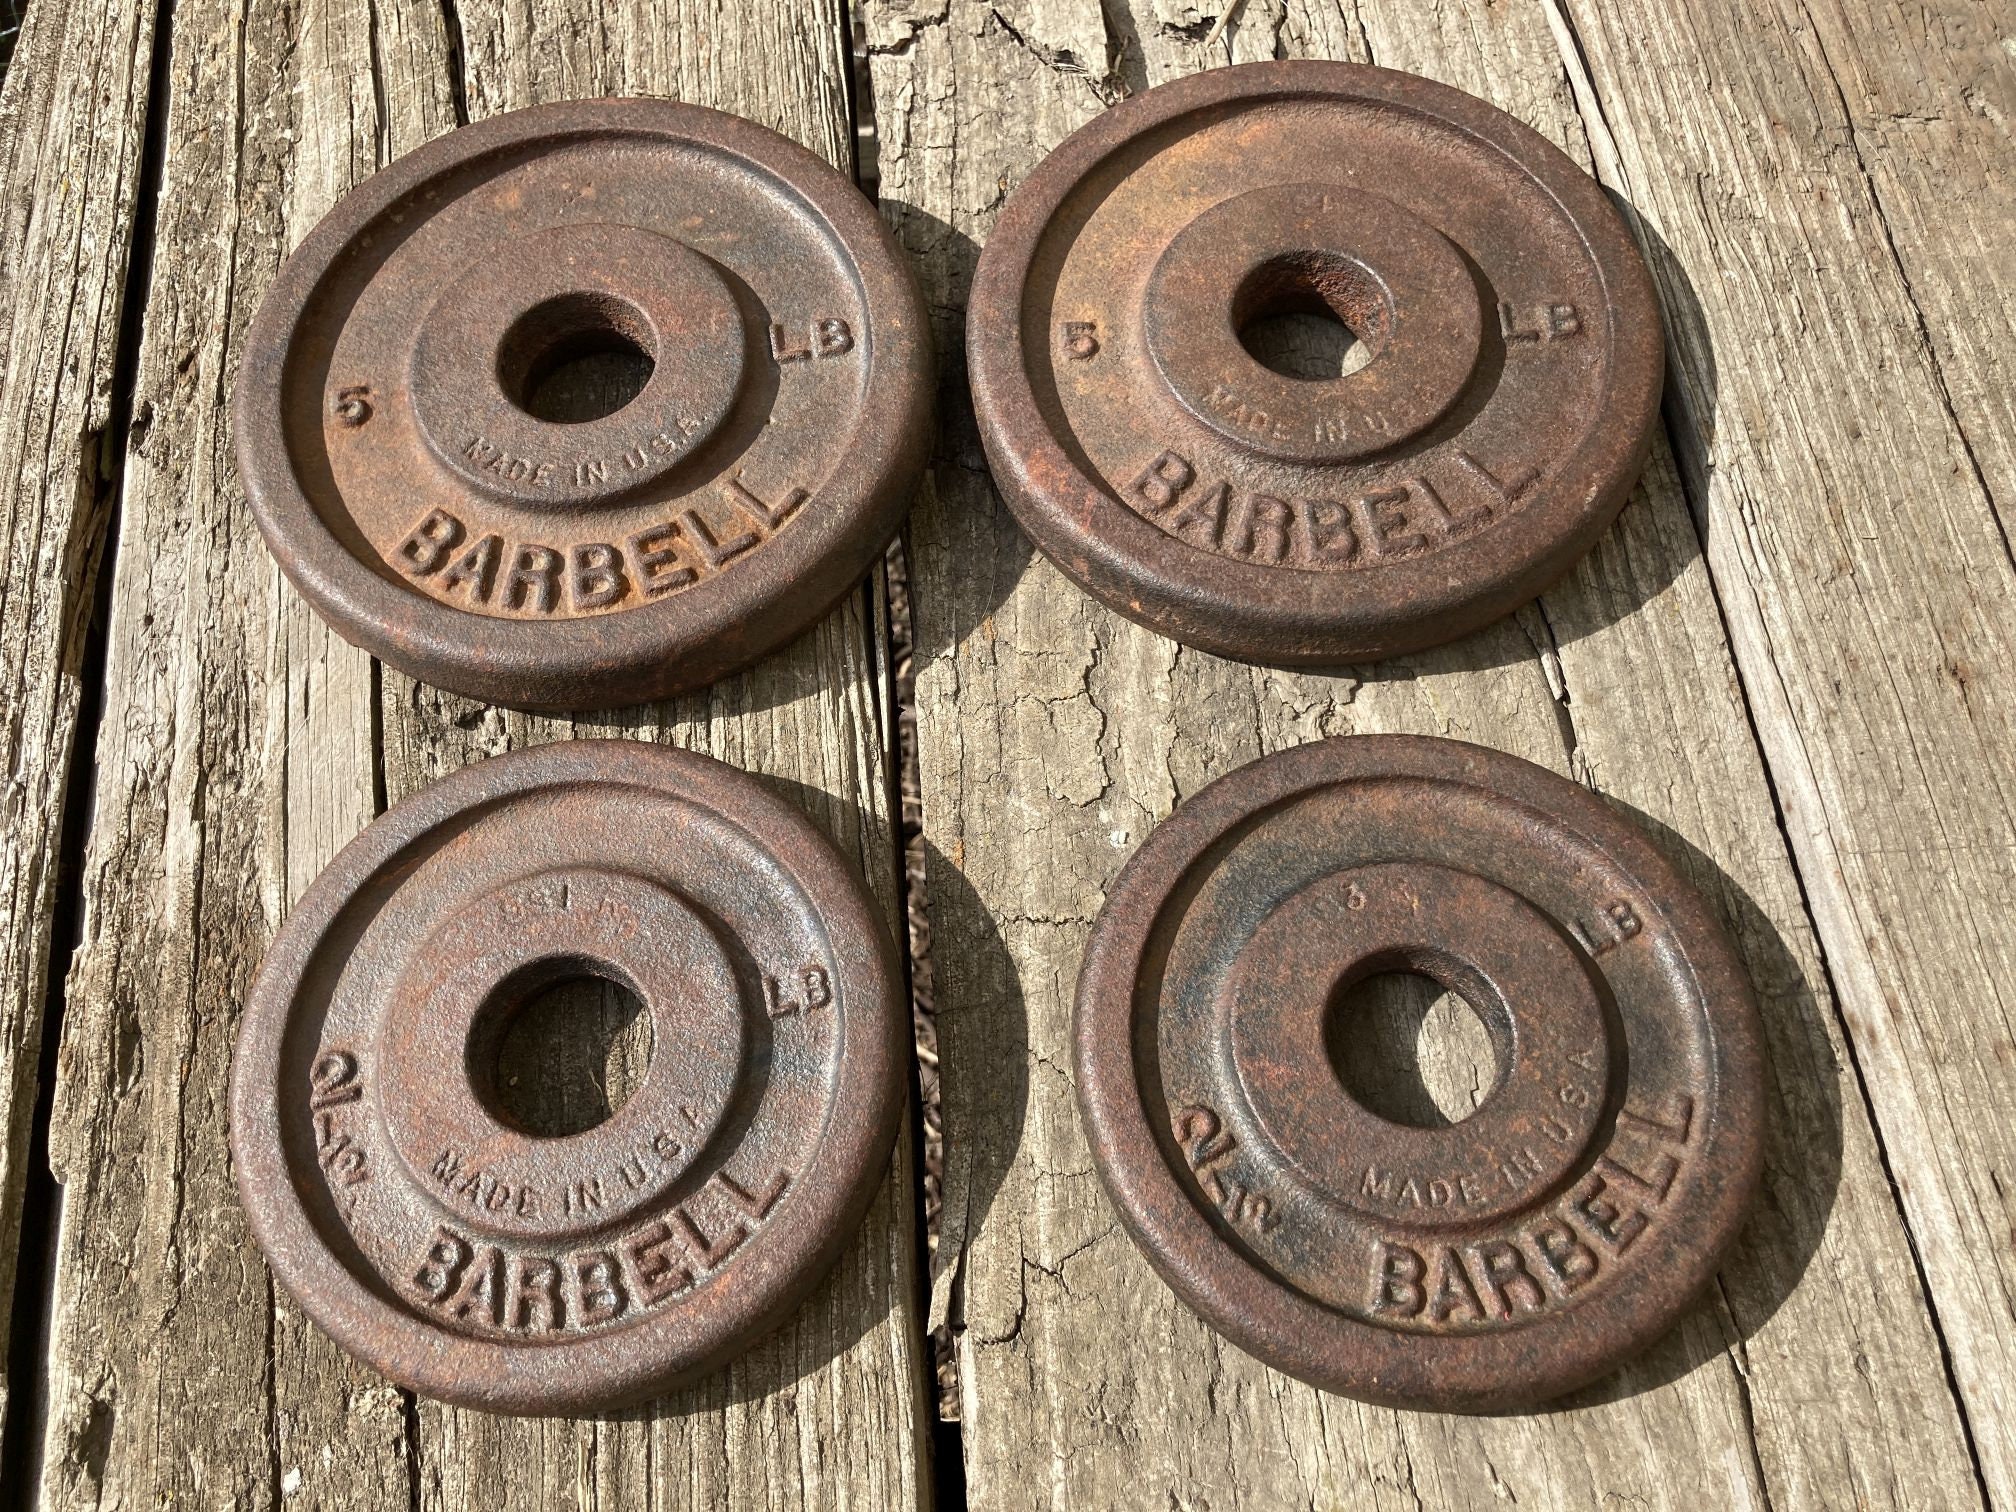 Weight Plates for sale in Belleville, Ontario